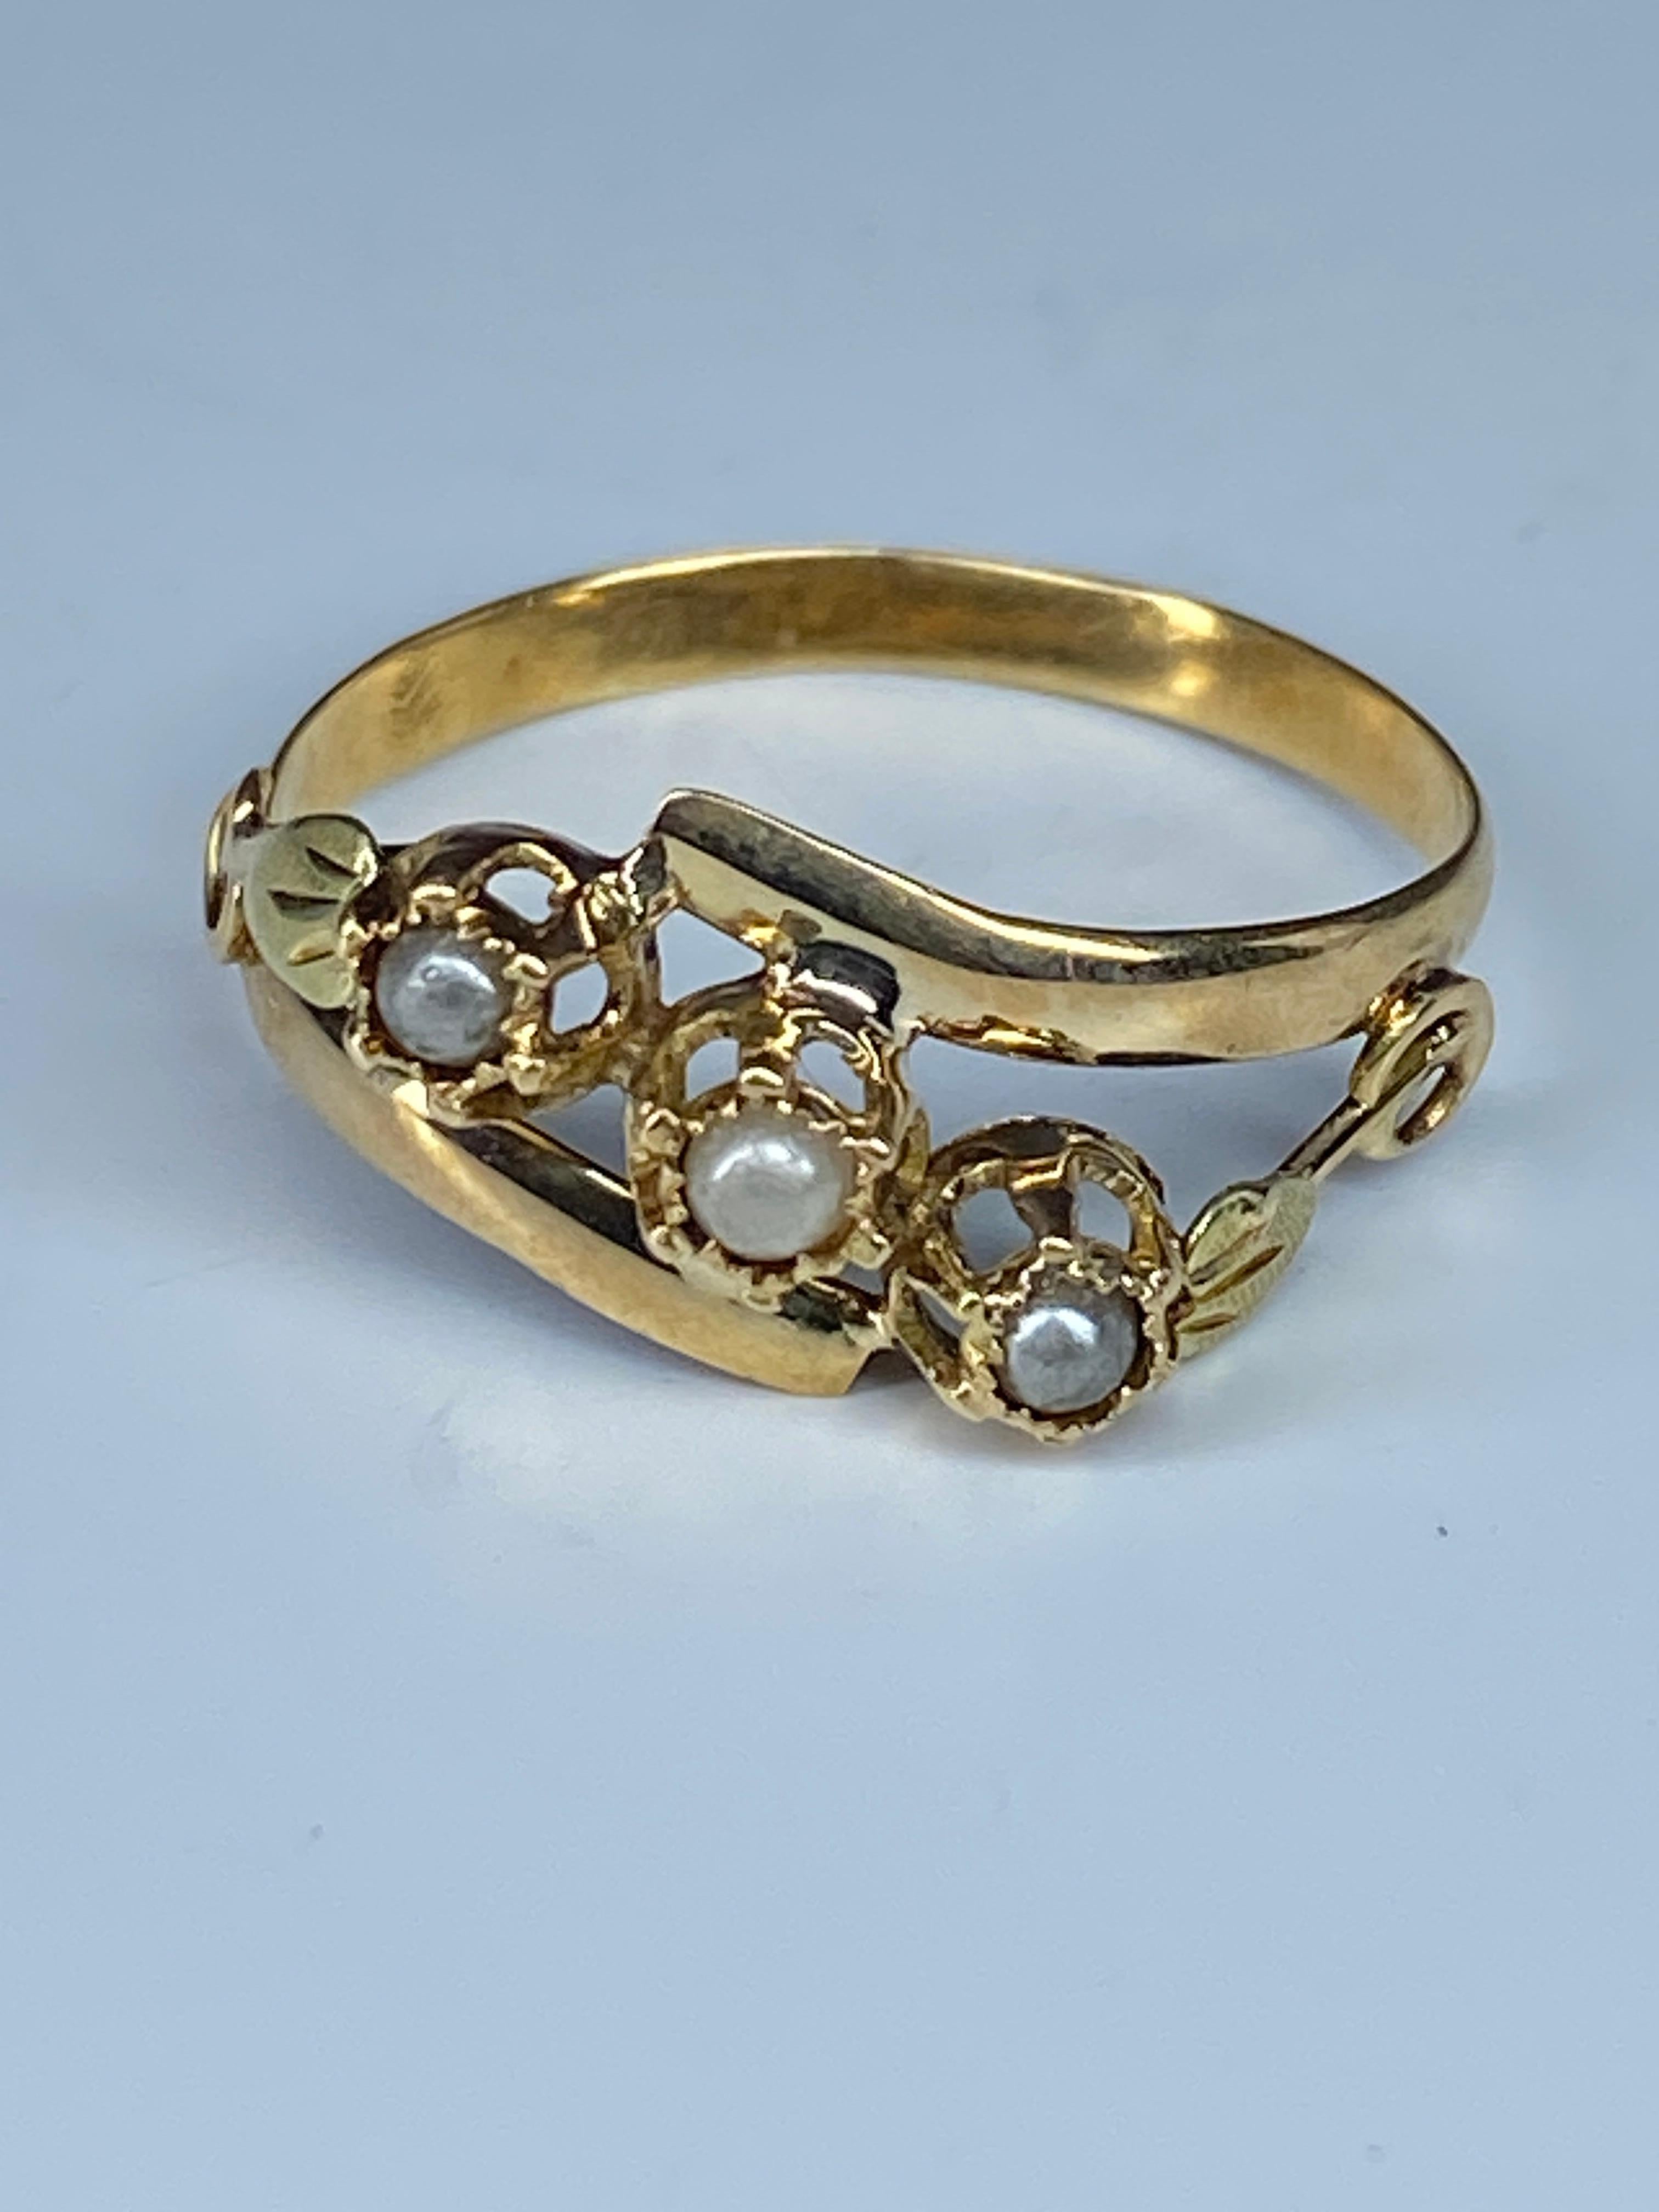 Women's or Men's 18 Carat Gold Ring Set with 3 Fines Pearls, circa 1900